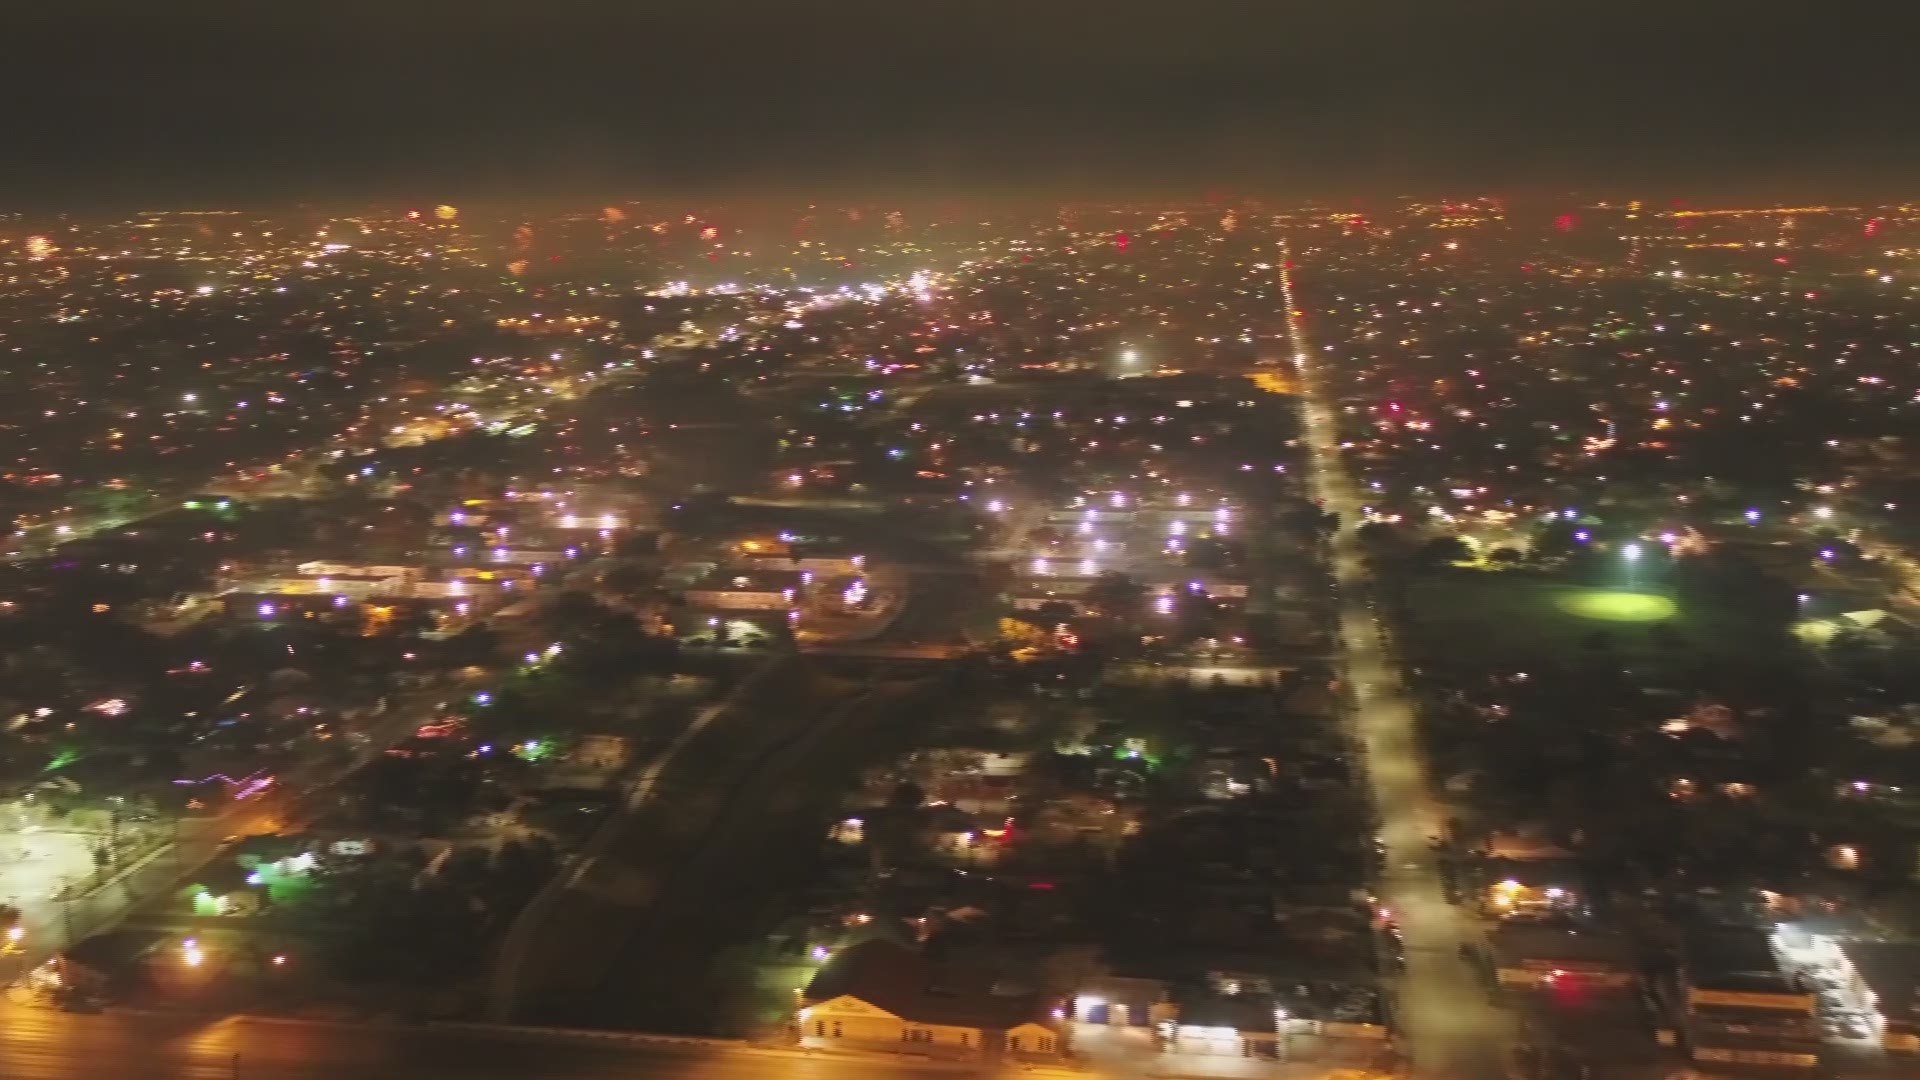 Amazing DRONE 5 video shows San Antonio lighting up as fireworks pop all over the city in celebration of the New Year!